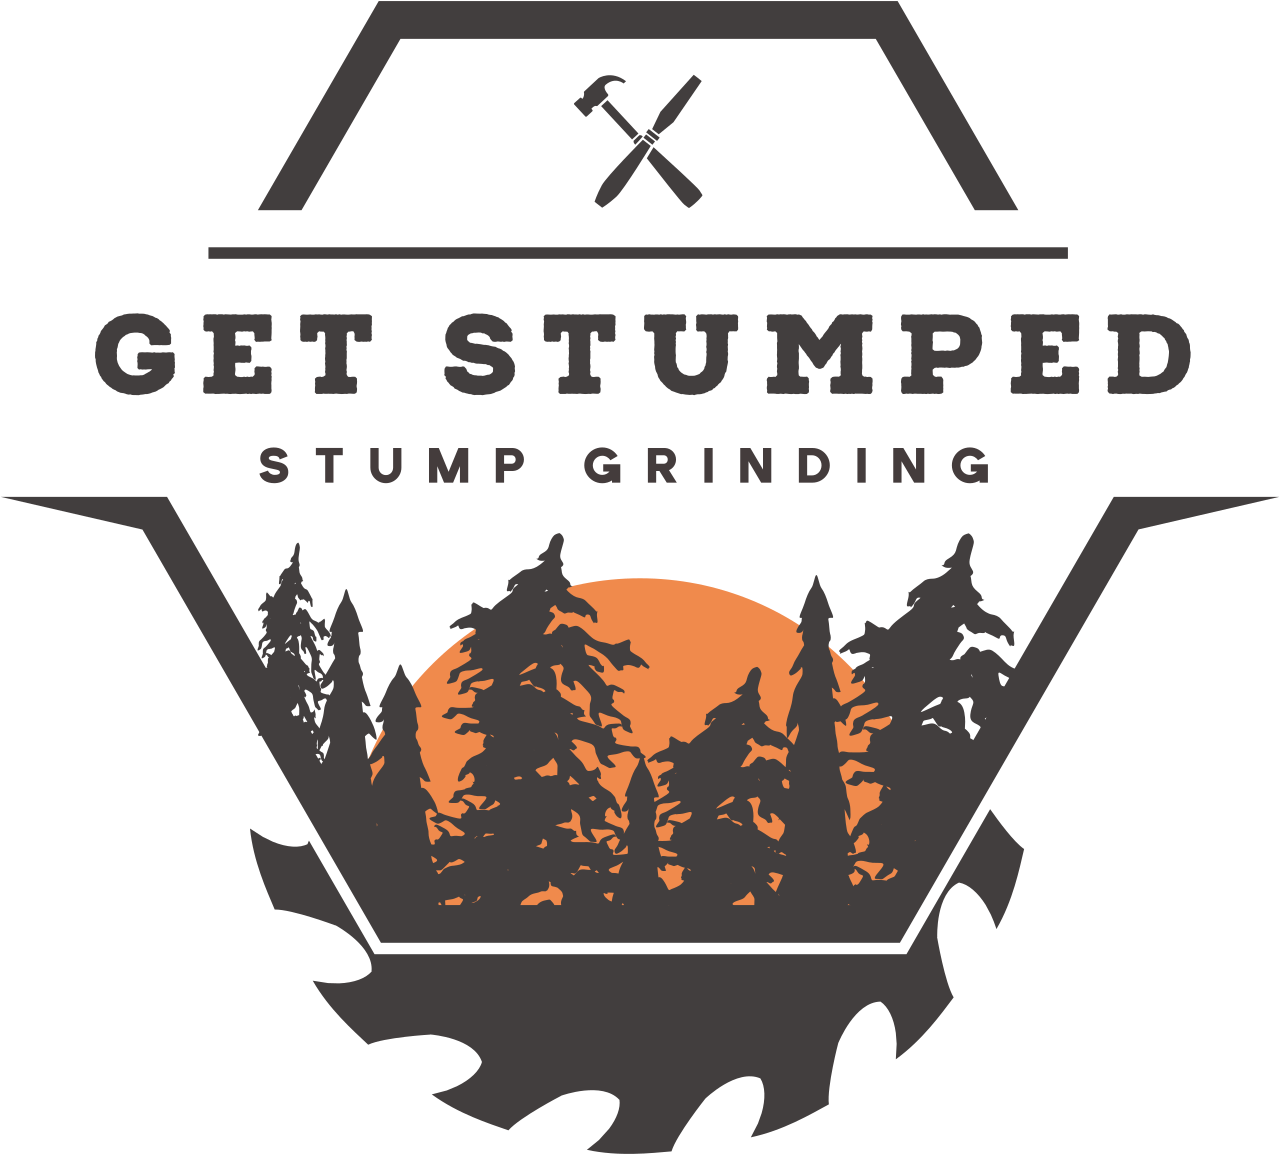 Get Stumped 's web page